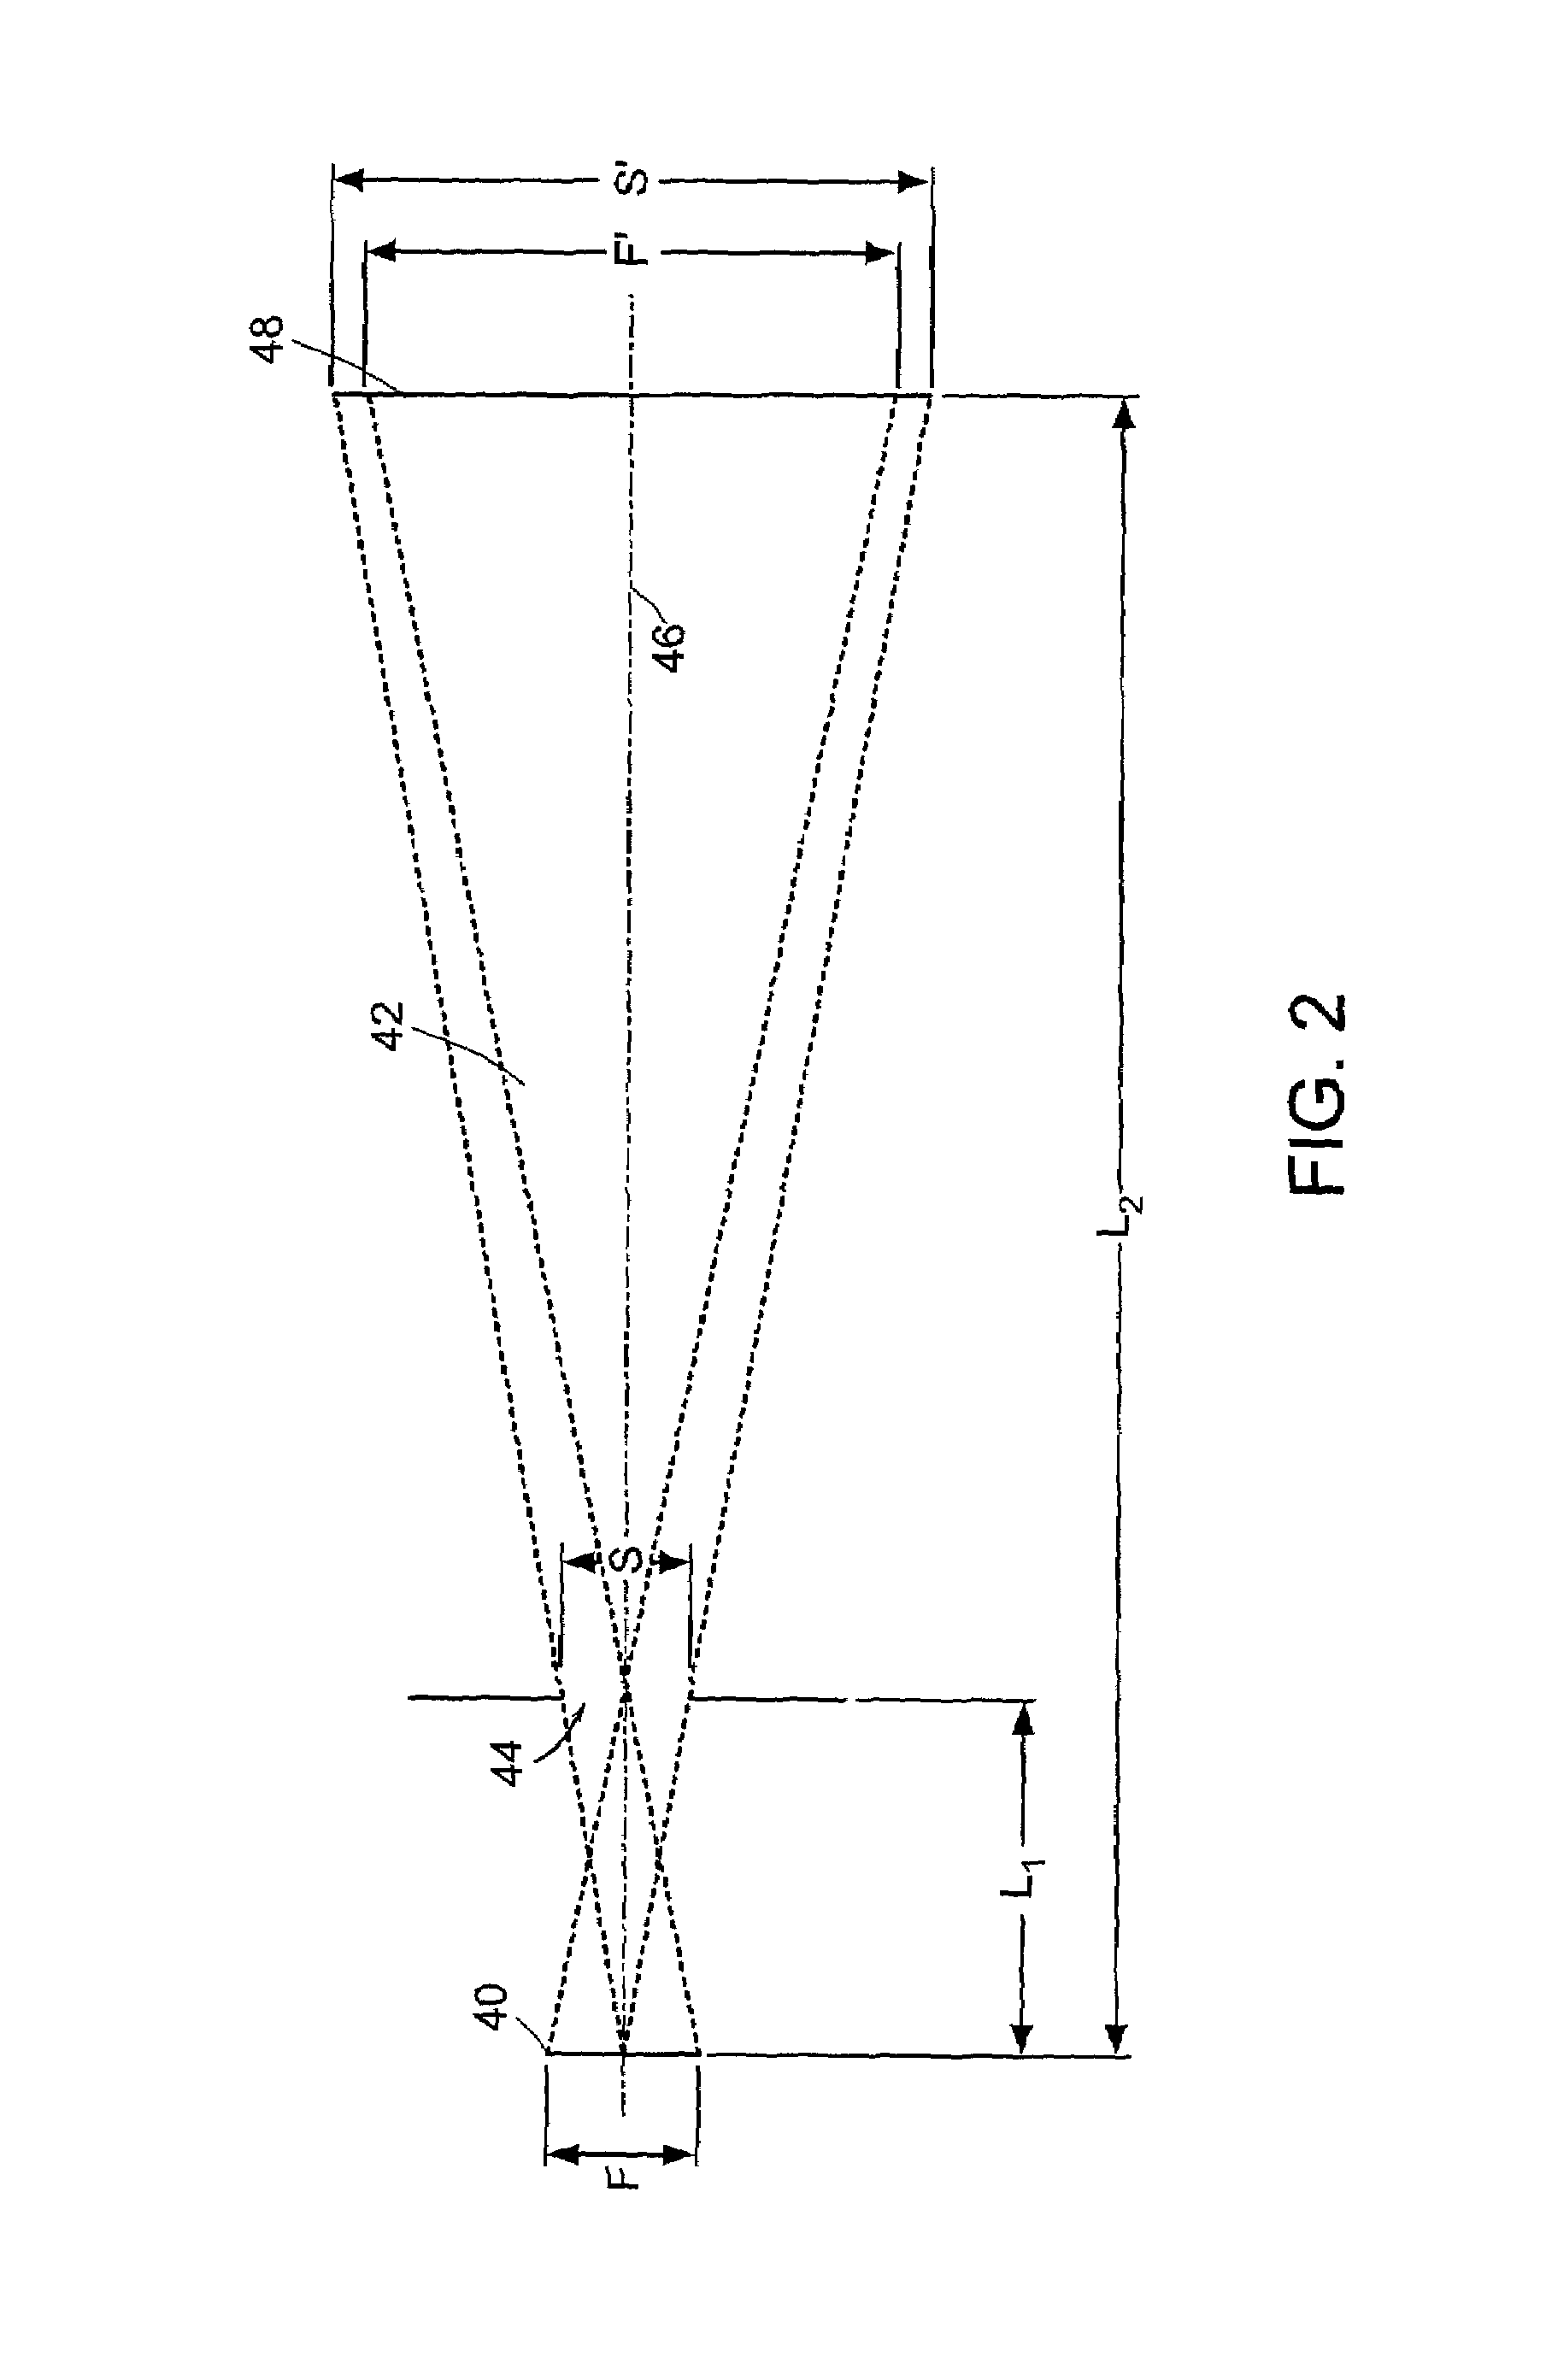 X-ray inspection using spatially and spectrally tailored beams